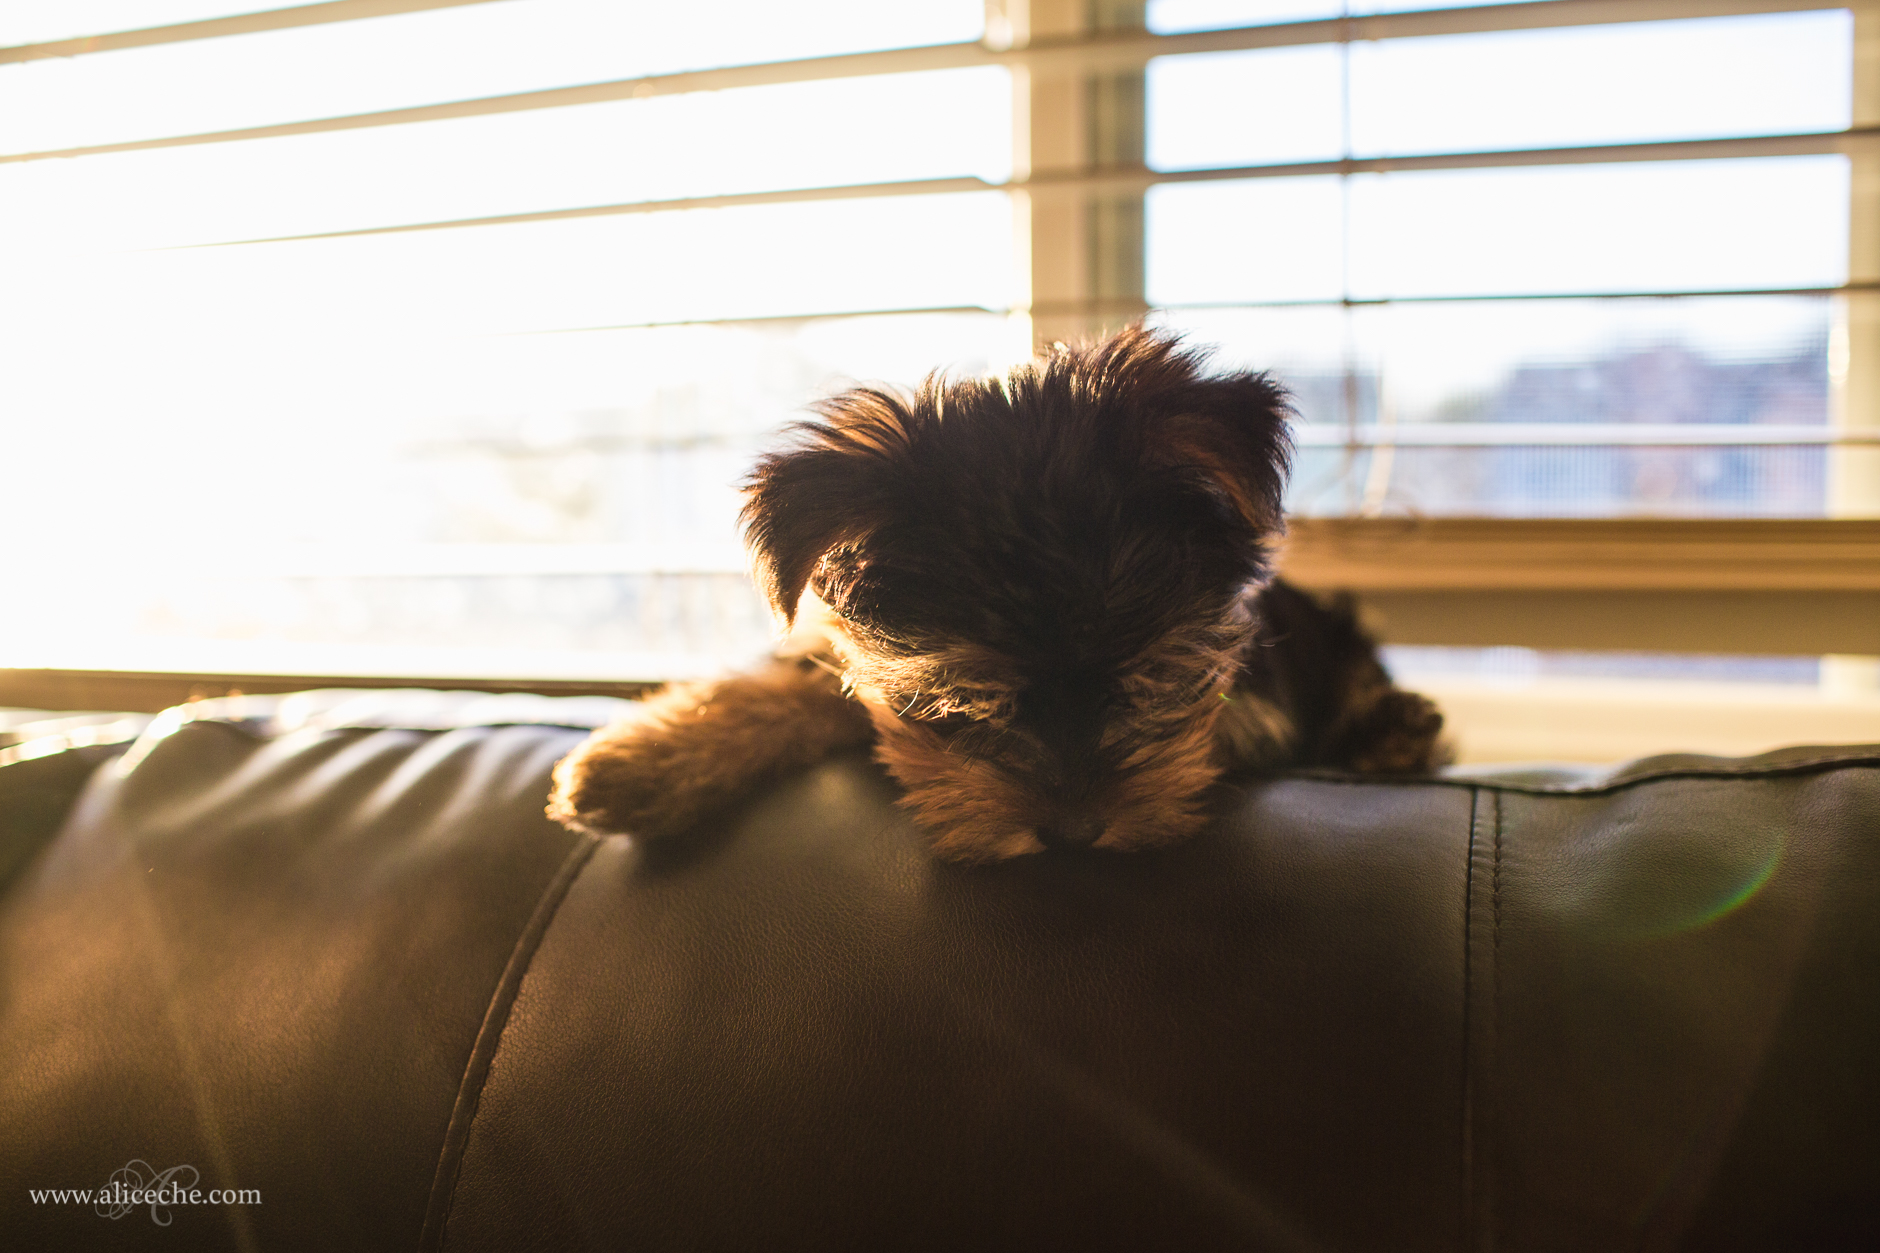 alice-che-photography-yorkshire-terrier-puppy-window